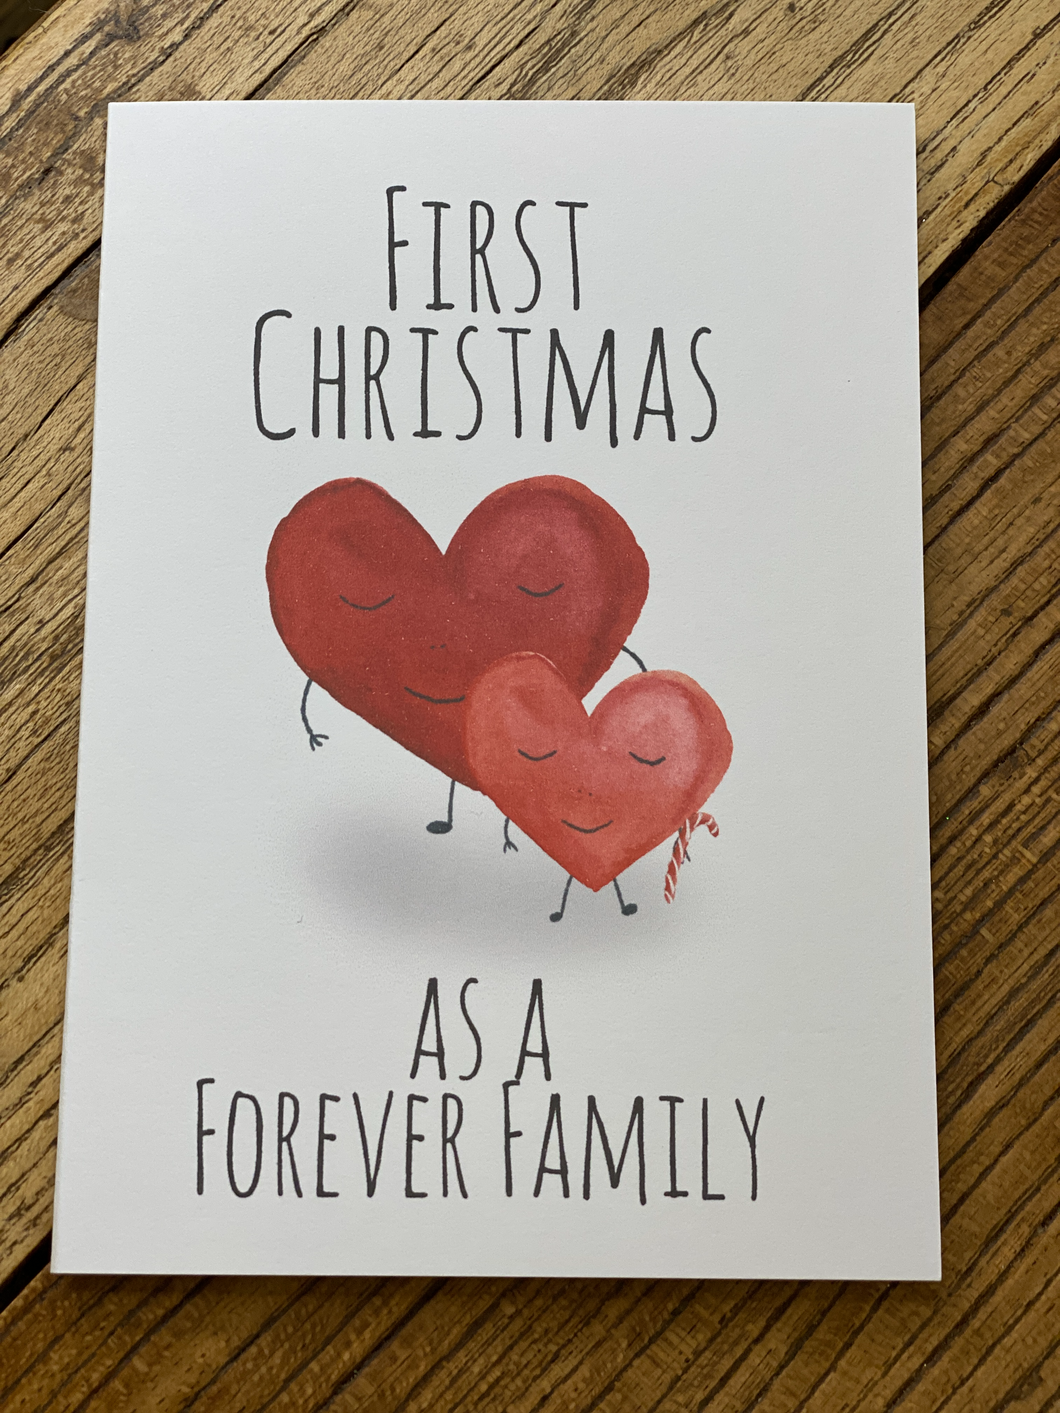 First Christmas as a forever family card - One parent